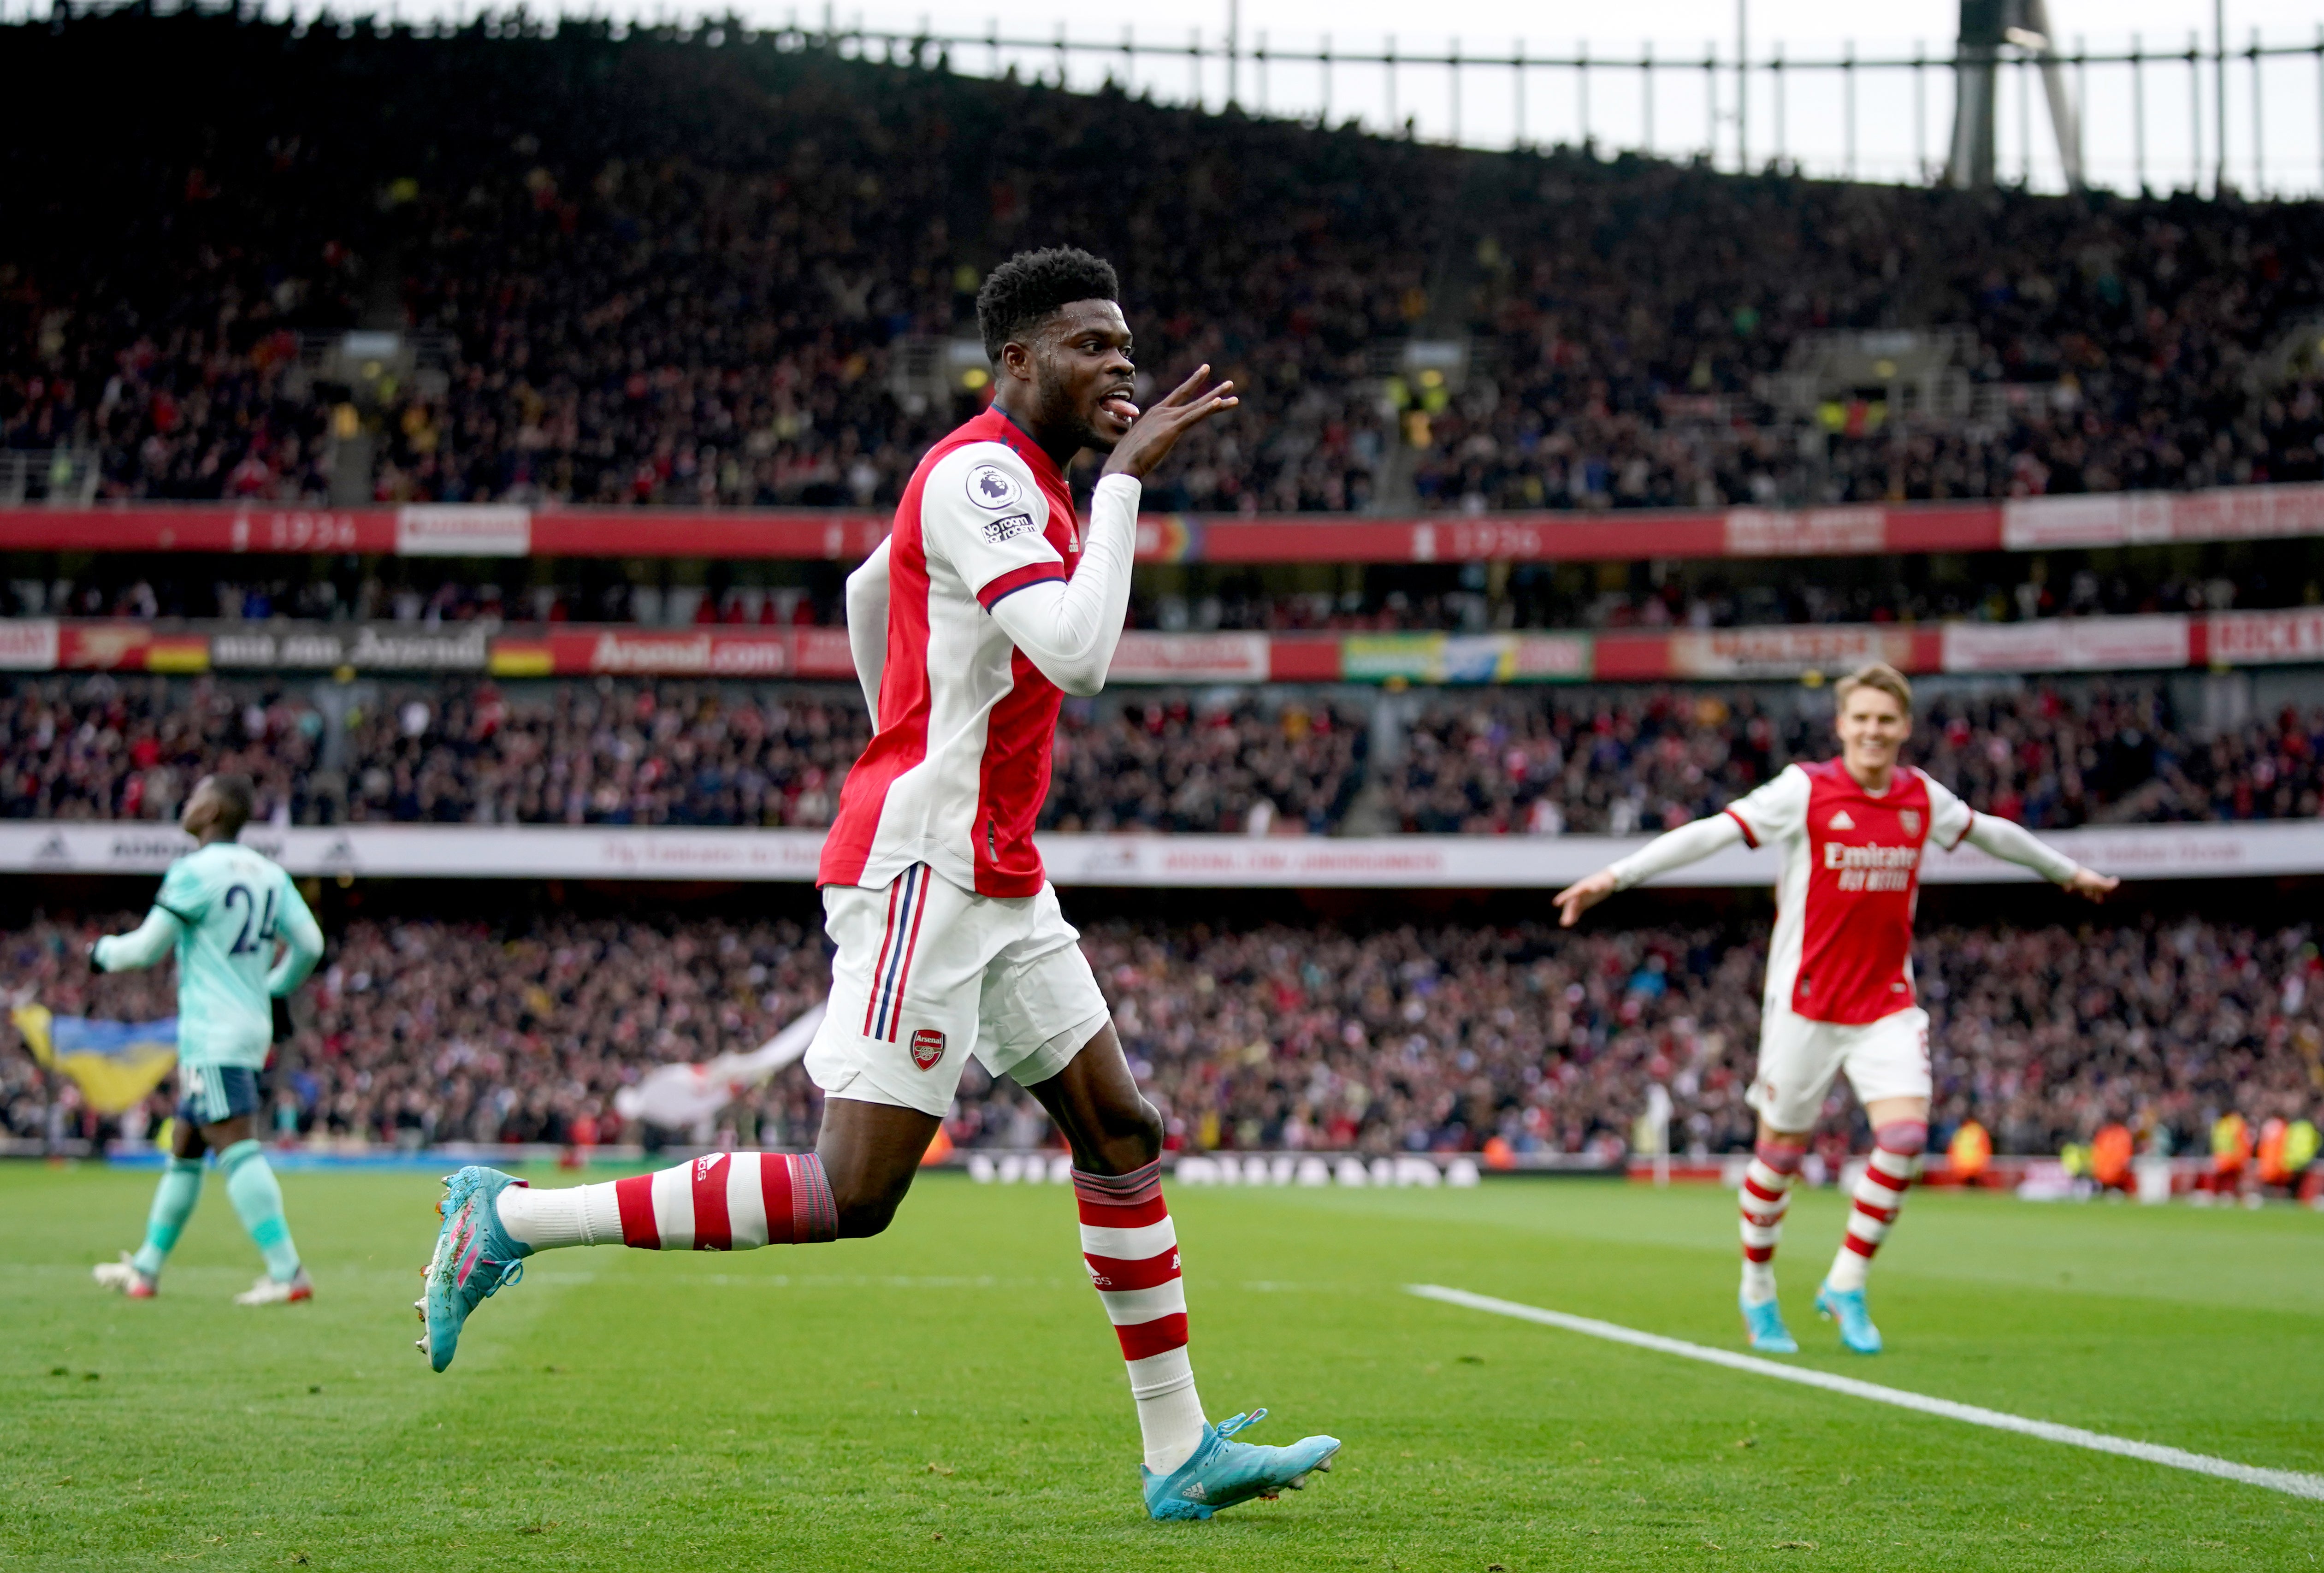 Mikel Arteta believes Thomas Partey has “come a long way” since he signed for the club (Nick Potts/PA)